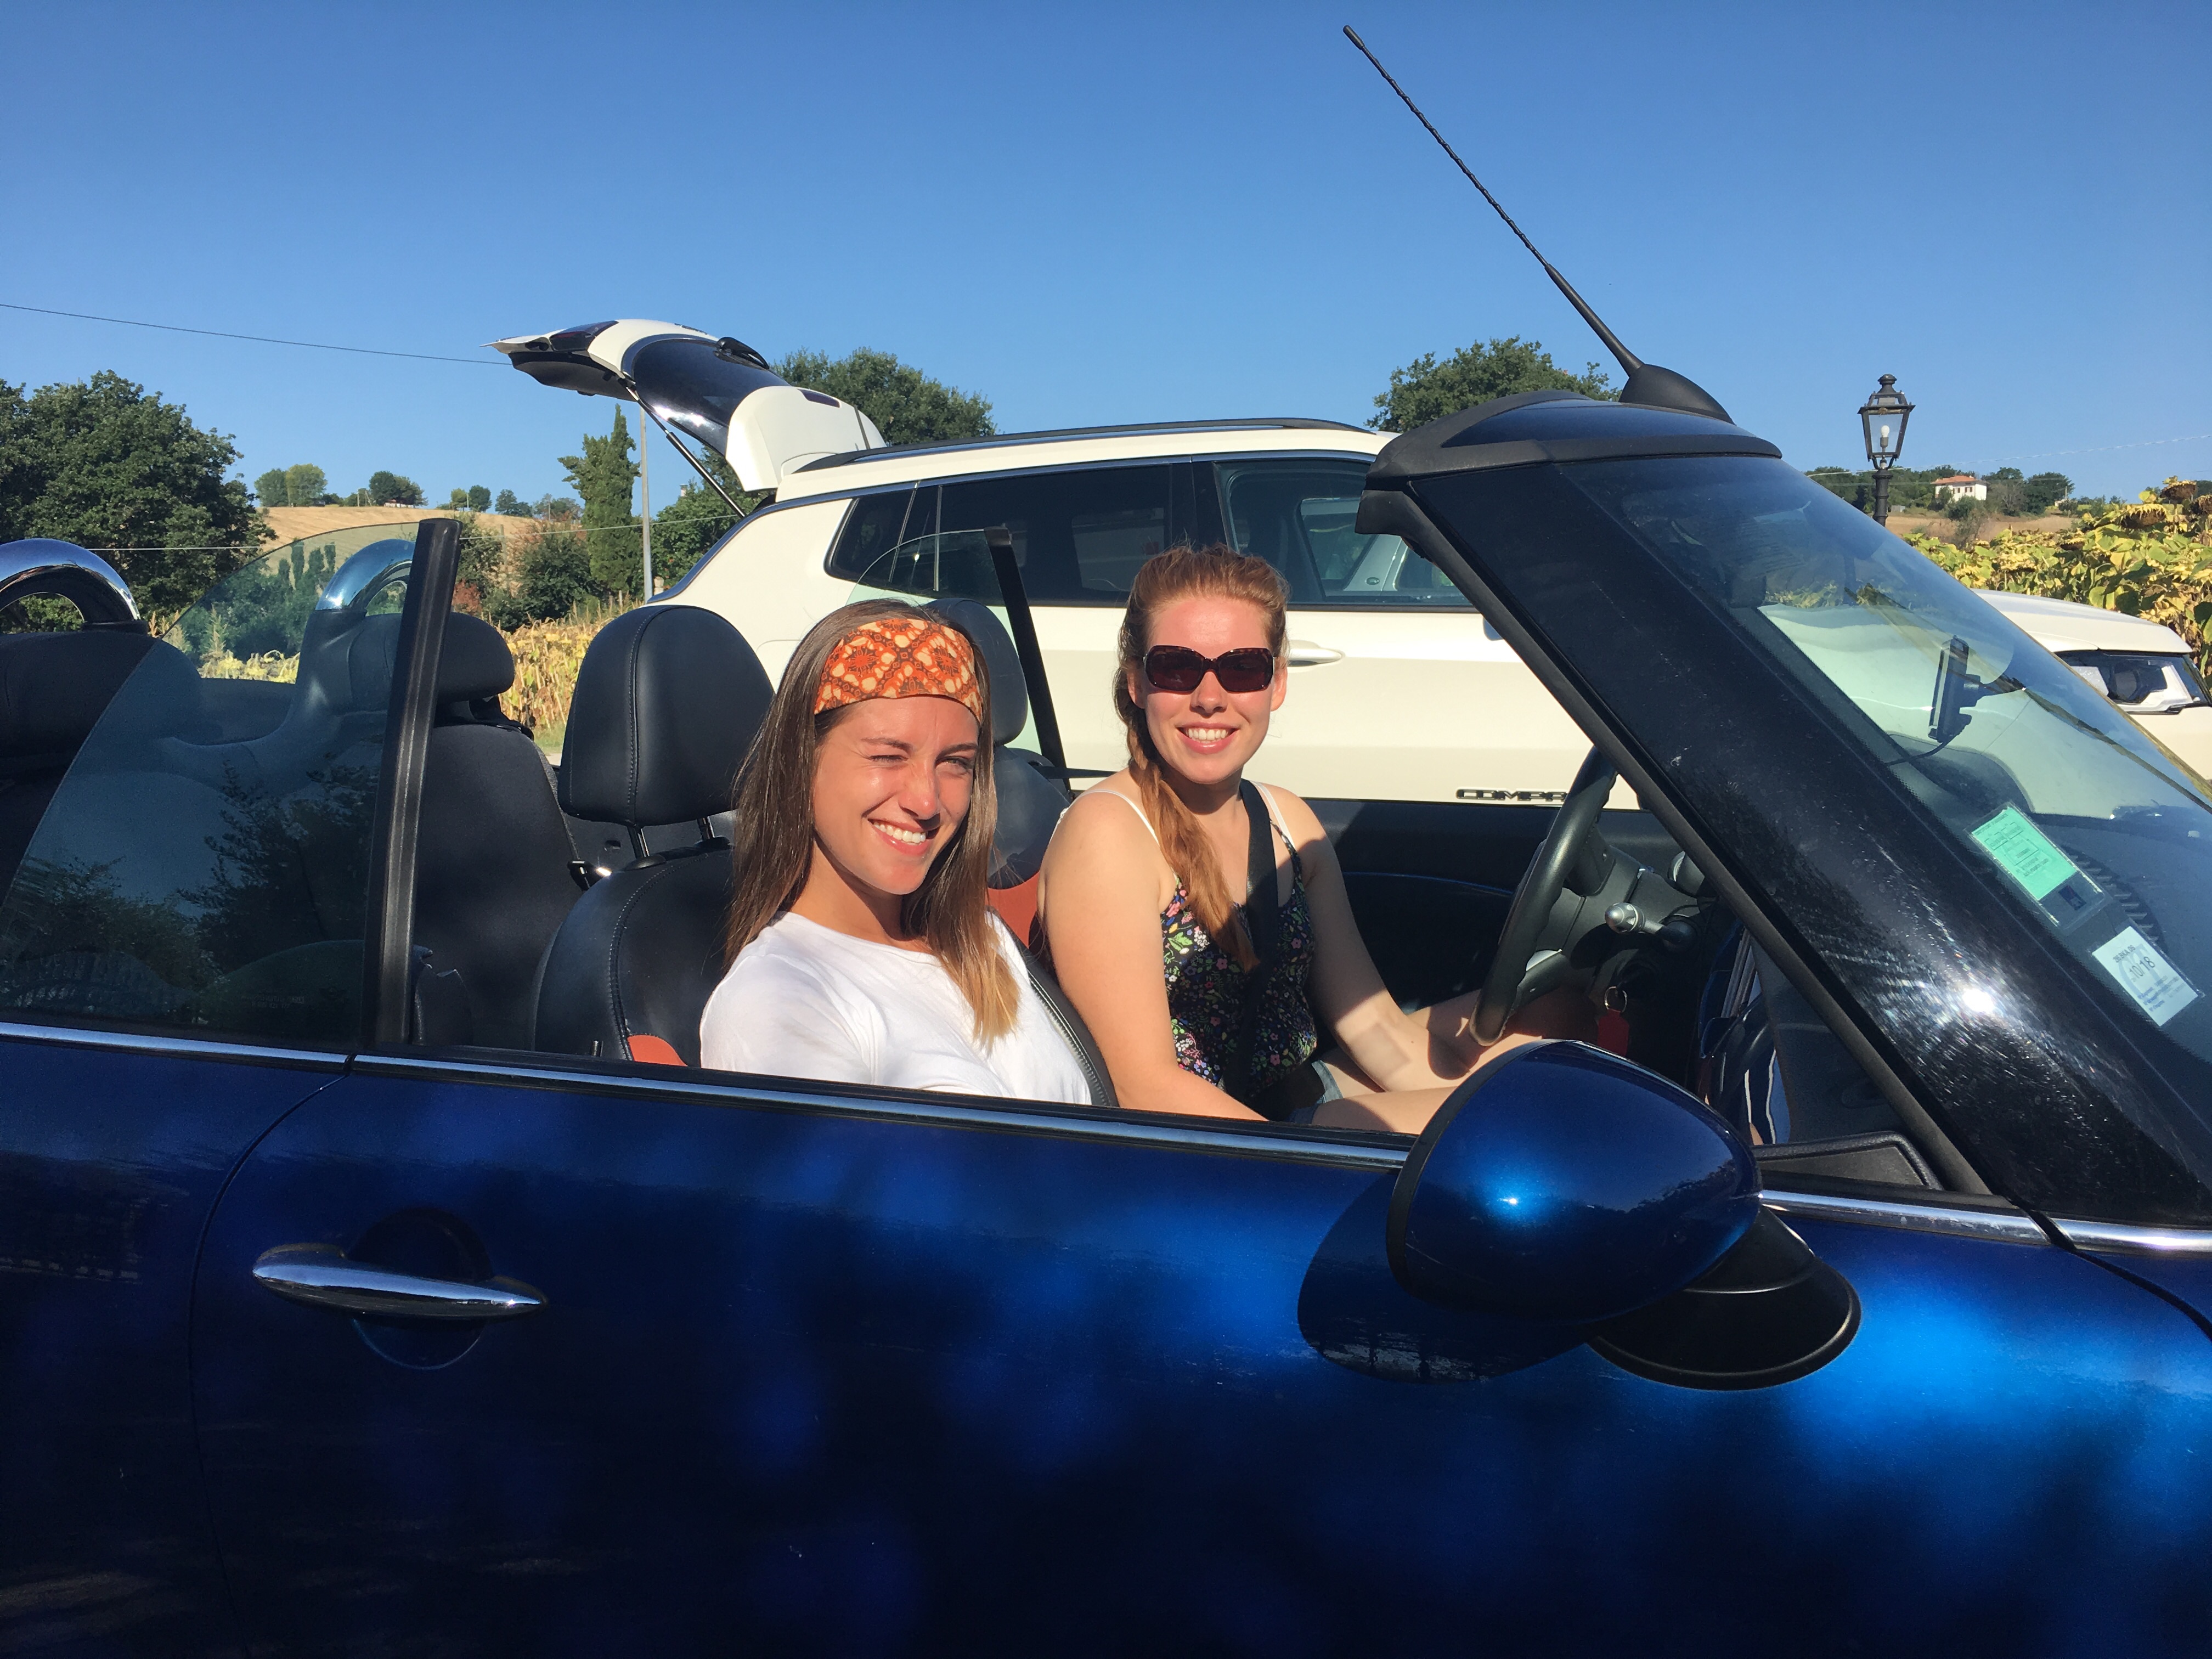 Lucy and Becky arrive in style - Villa Pedossa, Le Marche, Italy 